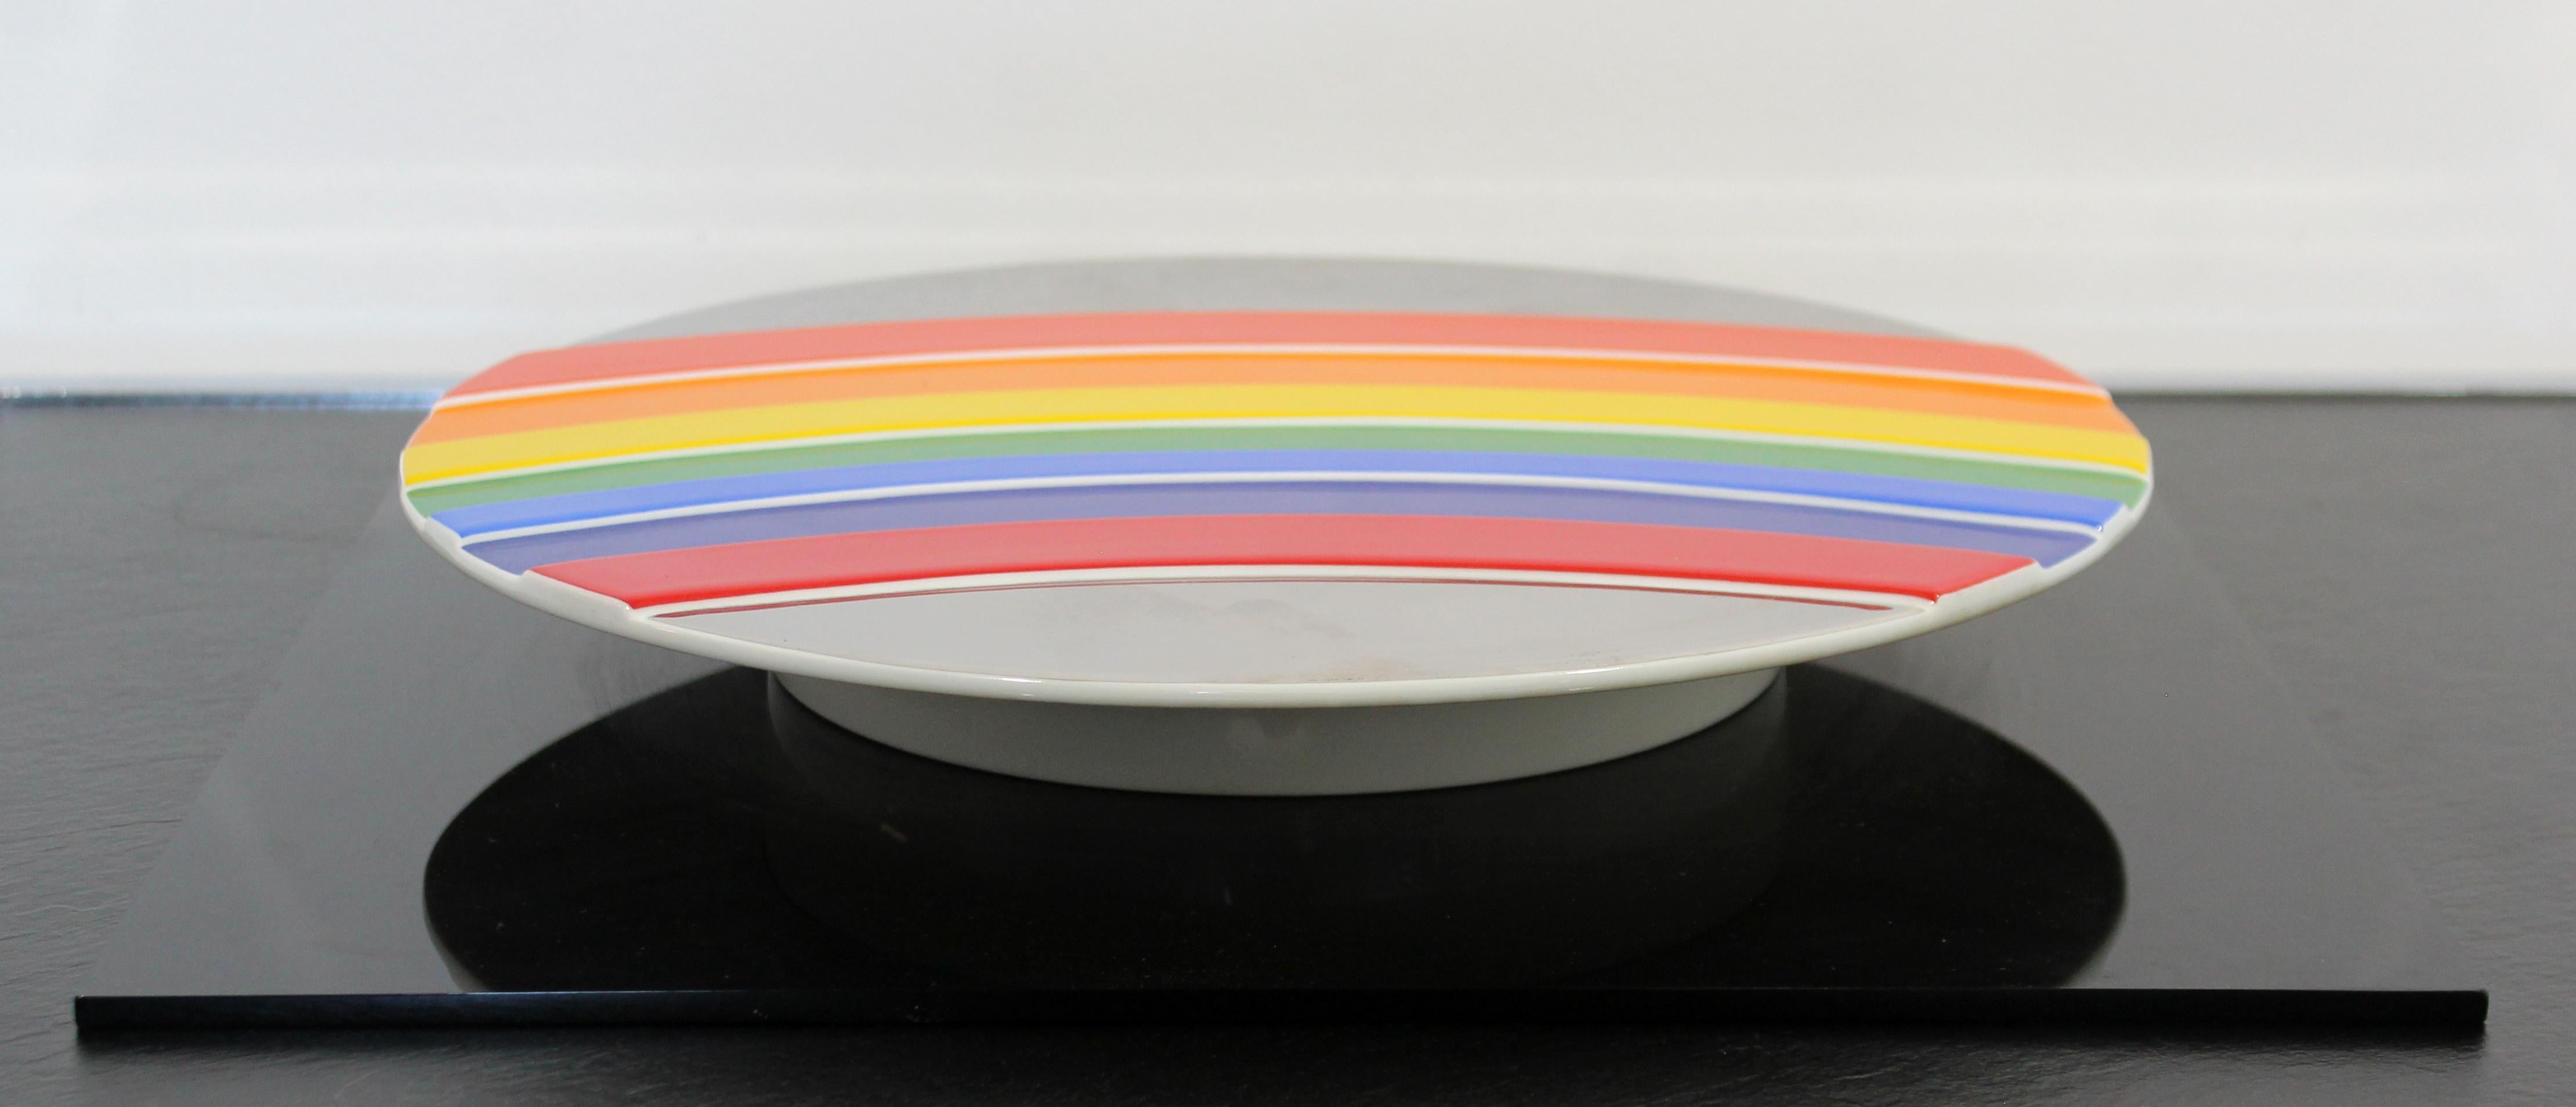 For your consideration is a ravishing, rainbow porcelain art plate, marked Rosenthal Jahresteller edition 1973, by Otto Piene, numbered 348/3,000, 1970s. In excellent condition. The dimensions are 15.5